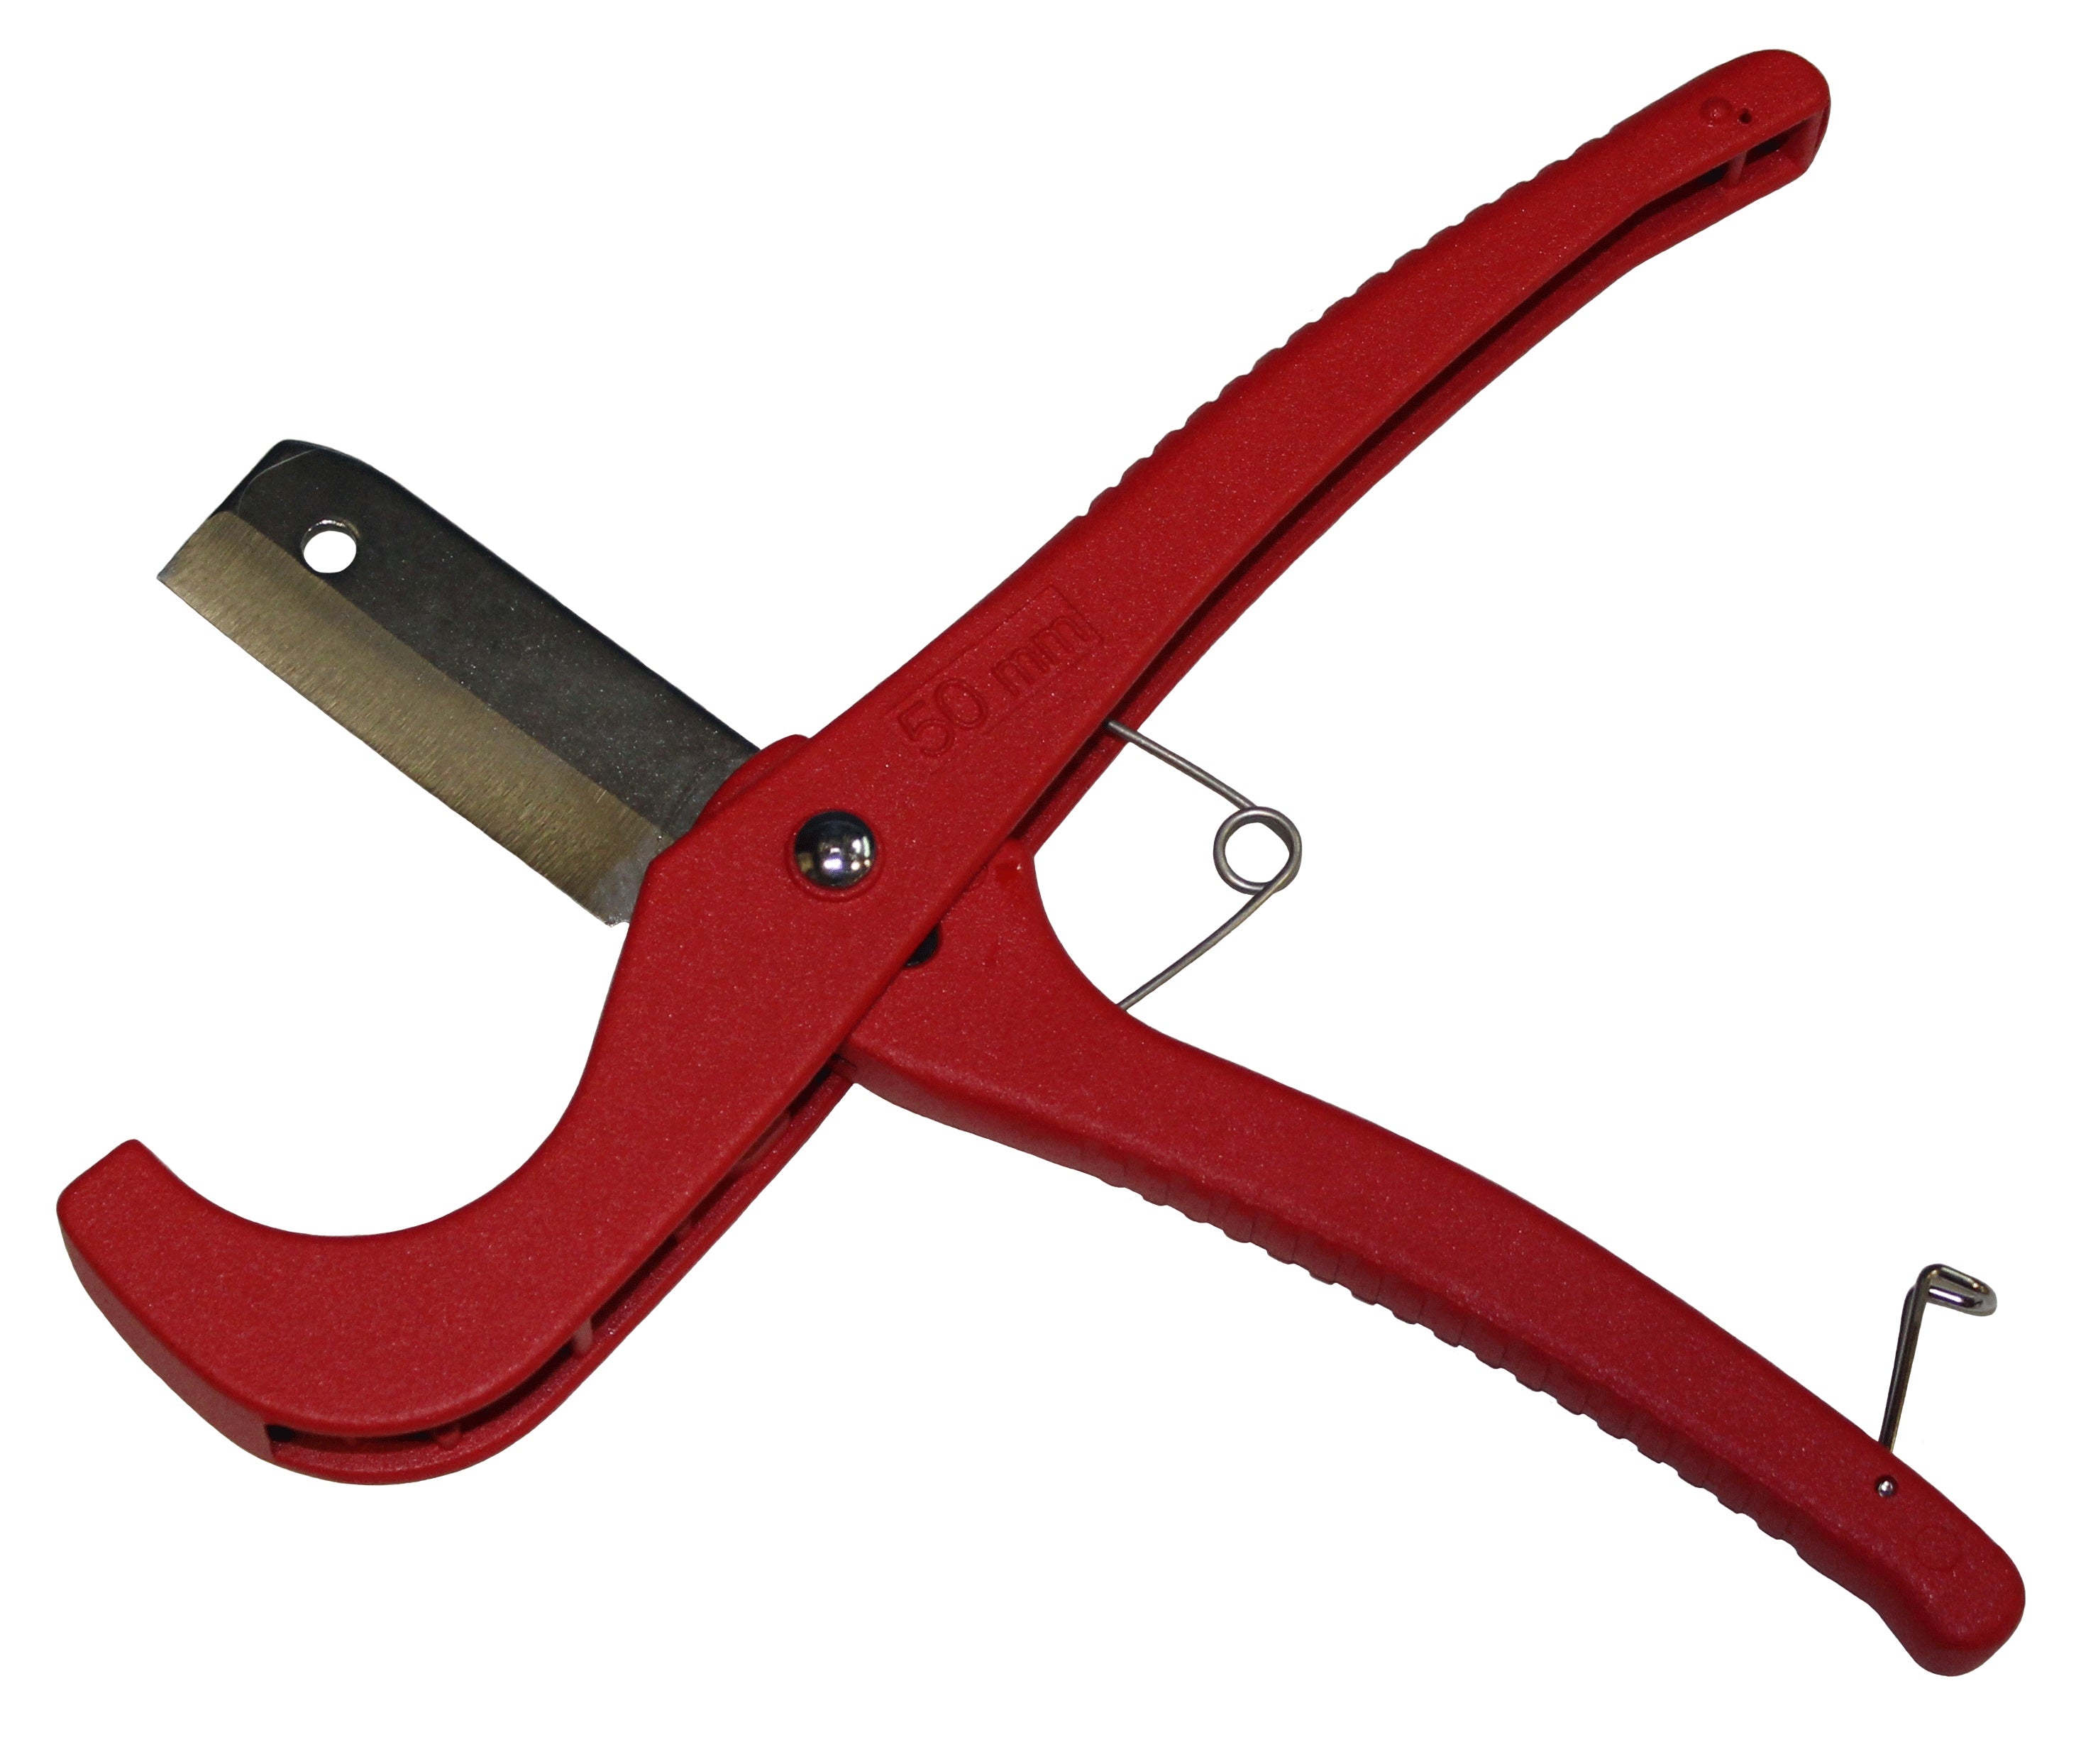 Hose Cutter With Blade 10-7-0003 Tool